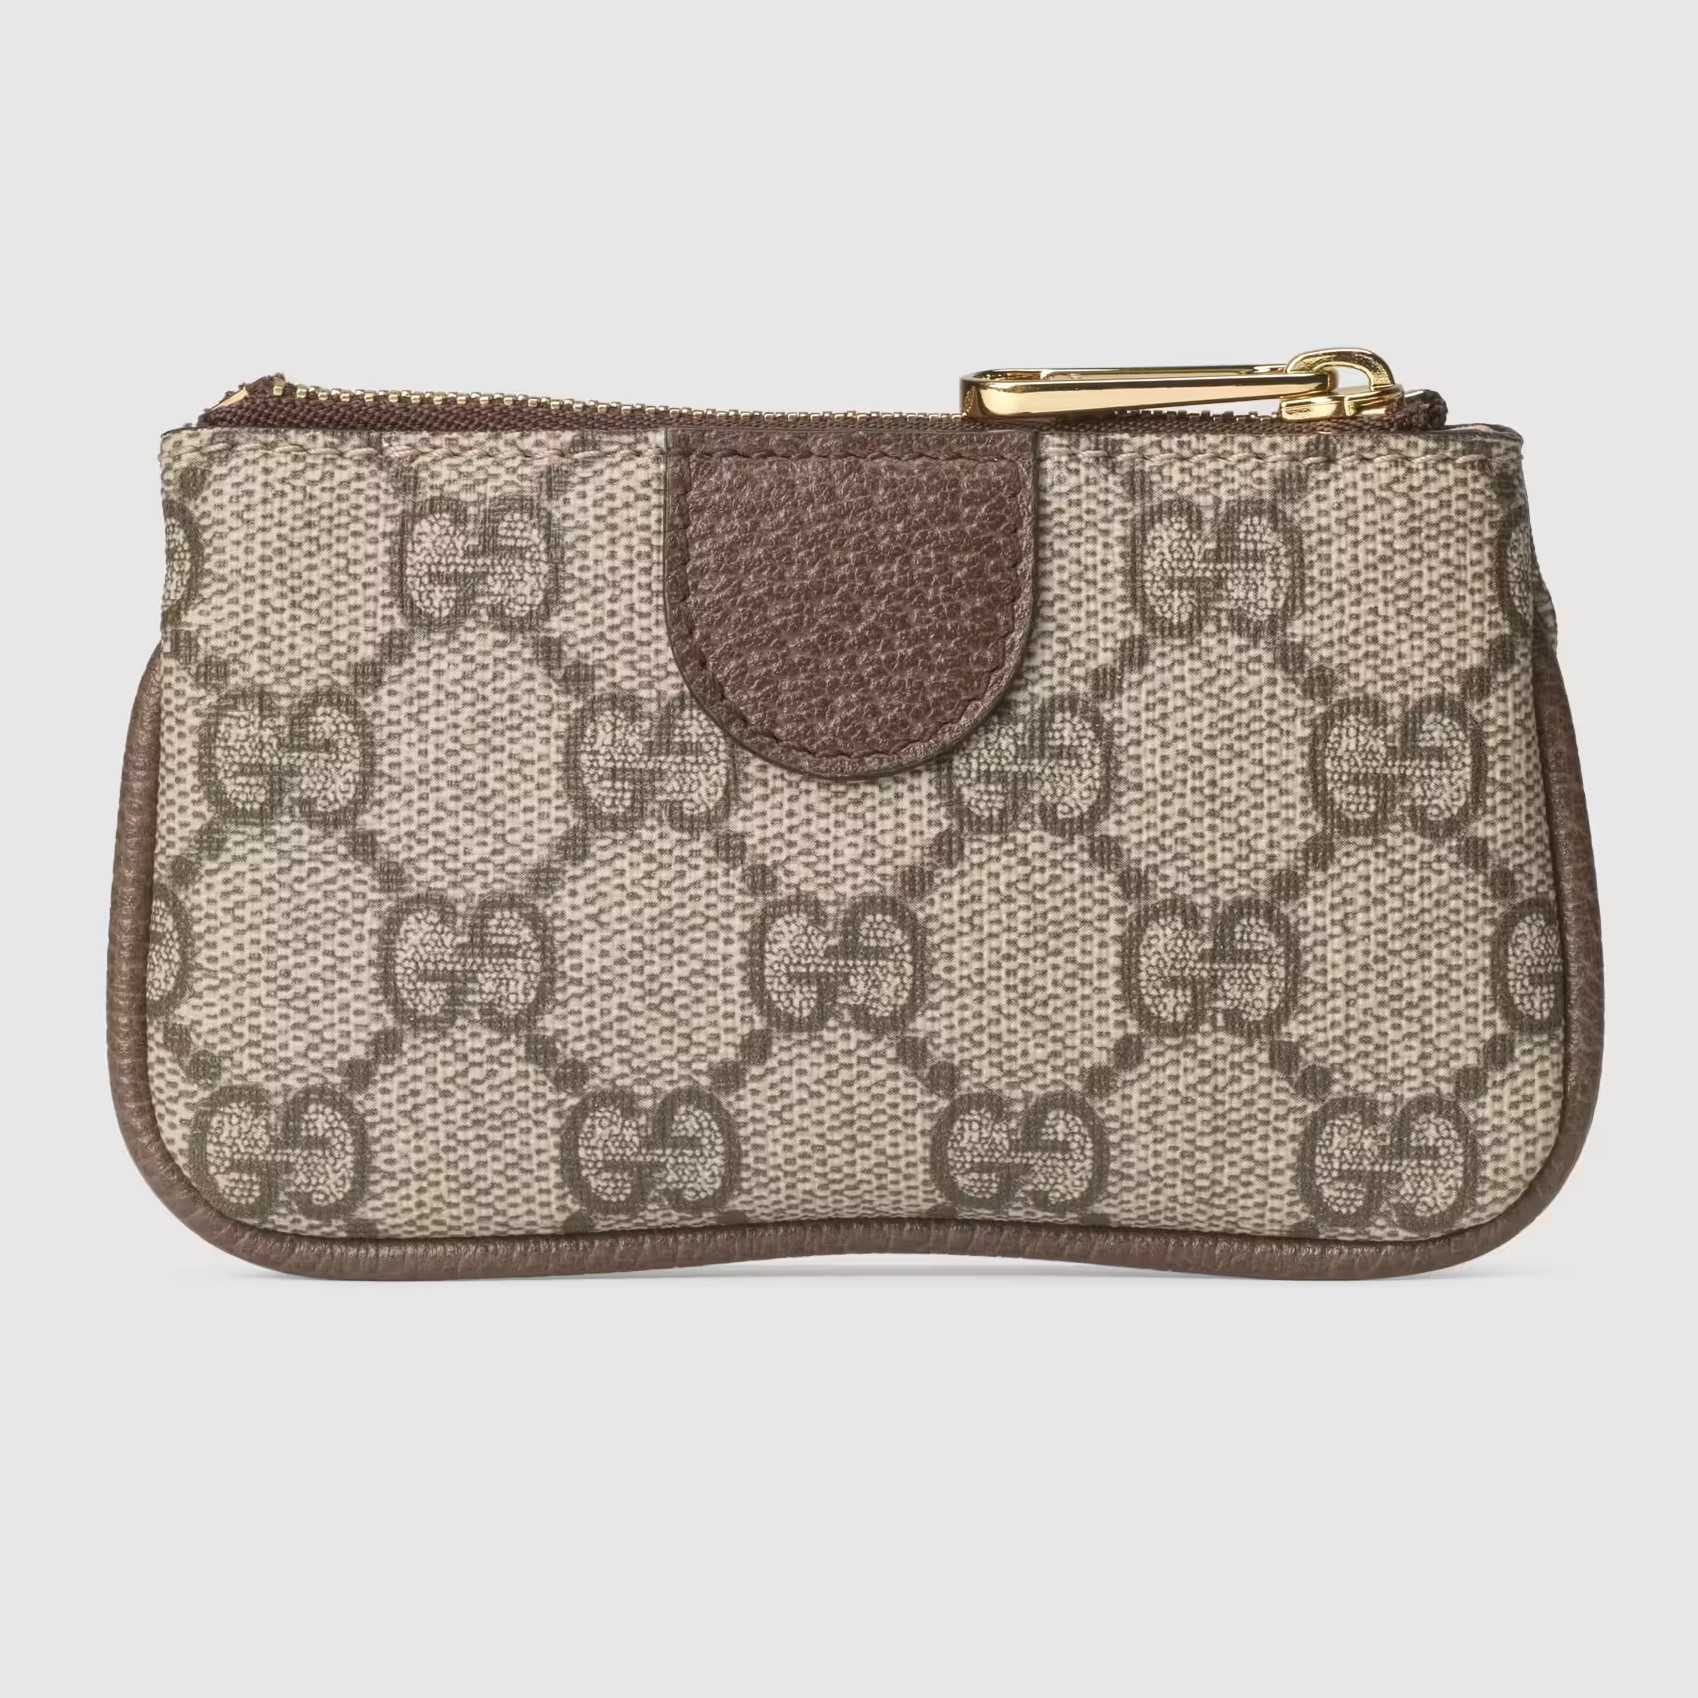 VÍ NỮ GUCCI MINI LIGHT OPHIDIA KEY CASE IN BEIGE AND EBONY GG SUPREME CANVAS 3